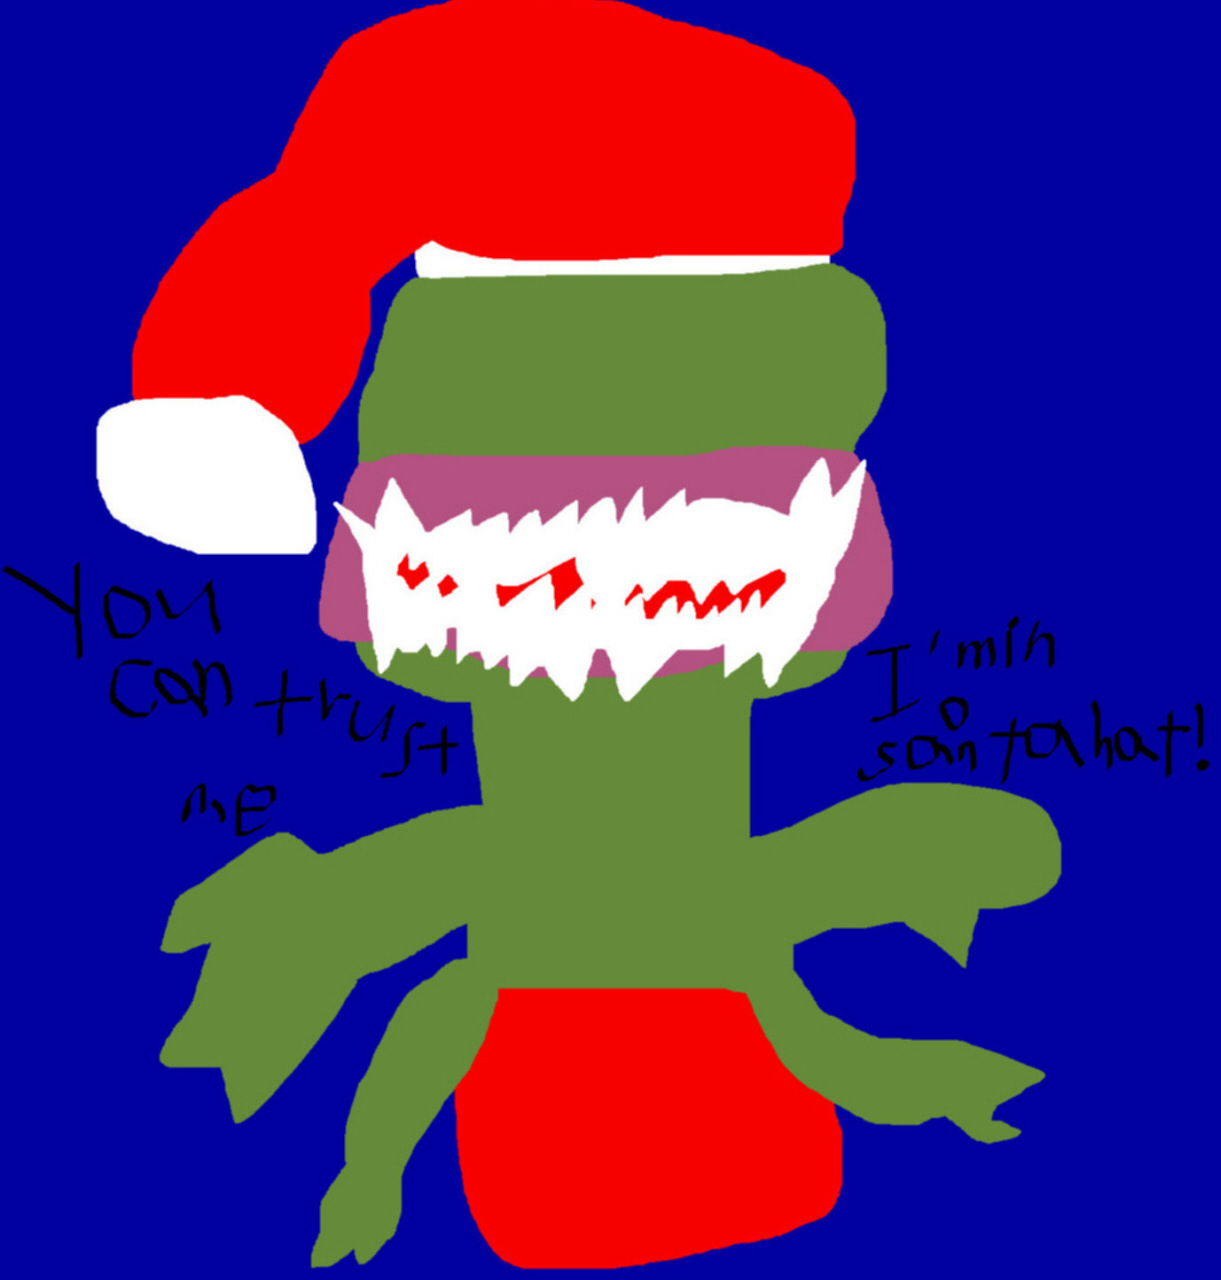 You Can Trust Me I'm In A Santa Hat  MS Paint by Falconlobo